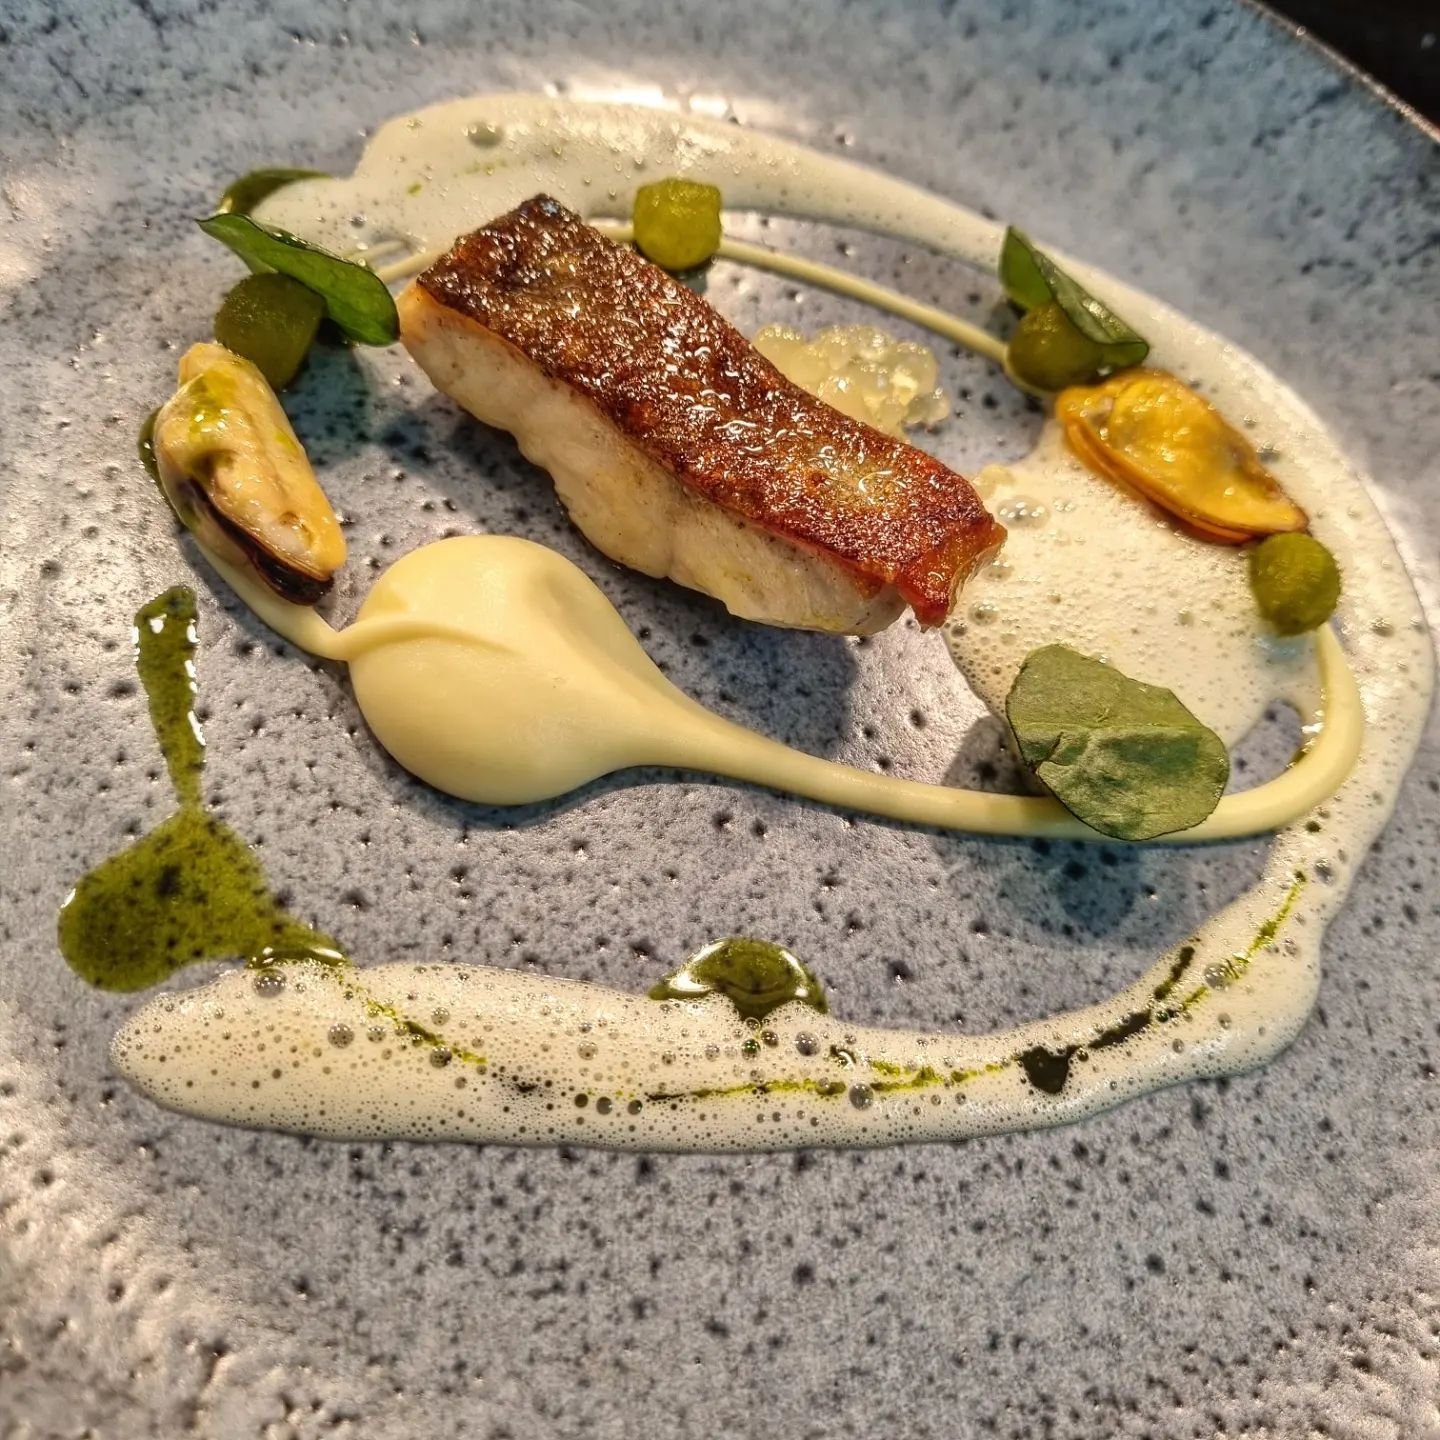 Ａｒｃｔｉｃ Ｃｈａｒ

Our current fish course, beautifully cooked and responsibly sourced.

Pan seared and served with celeriac from the kitchen garden. Chef has finished the dish with Granny Smith apple infused with dill oil, smoked mussels and yuzu pearls. 